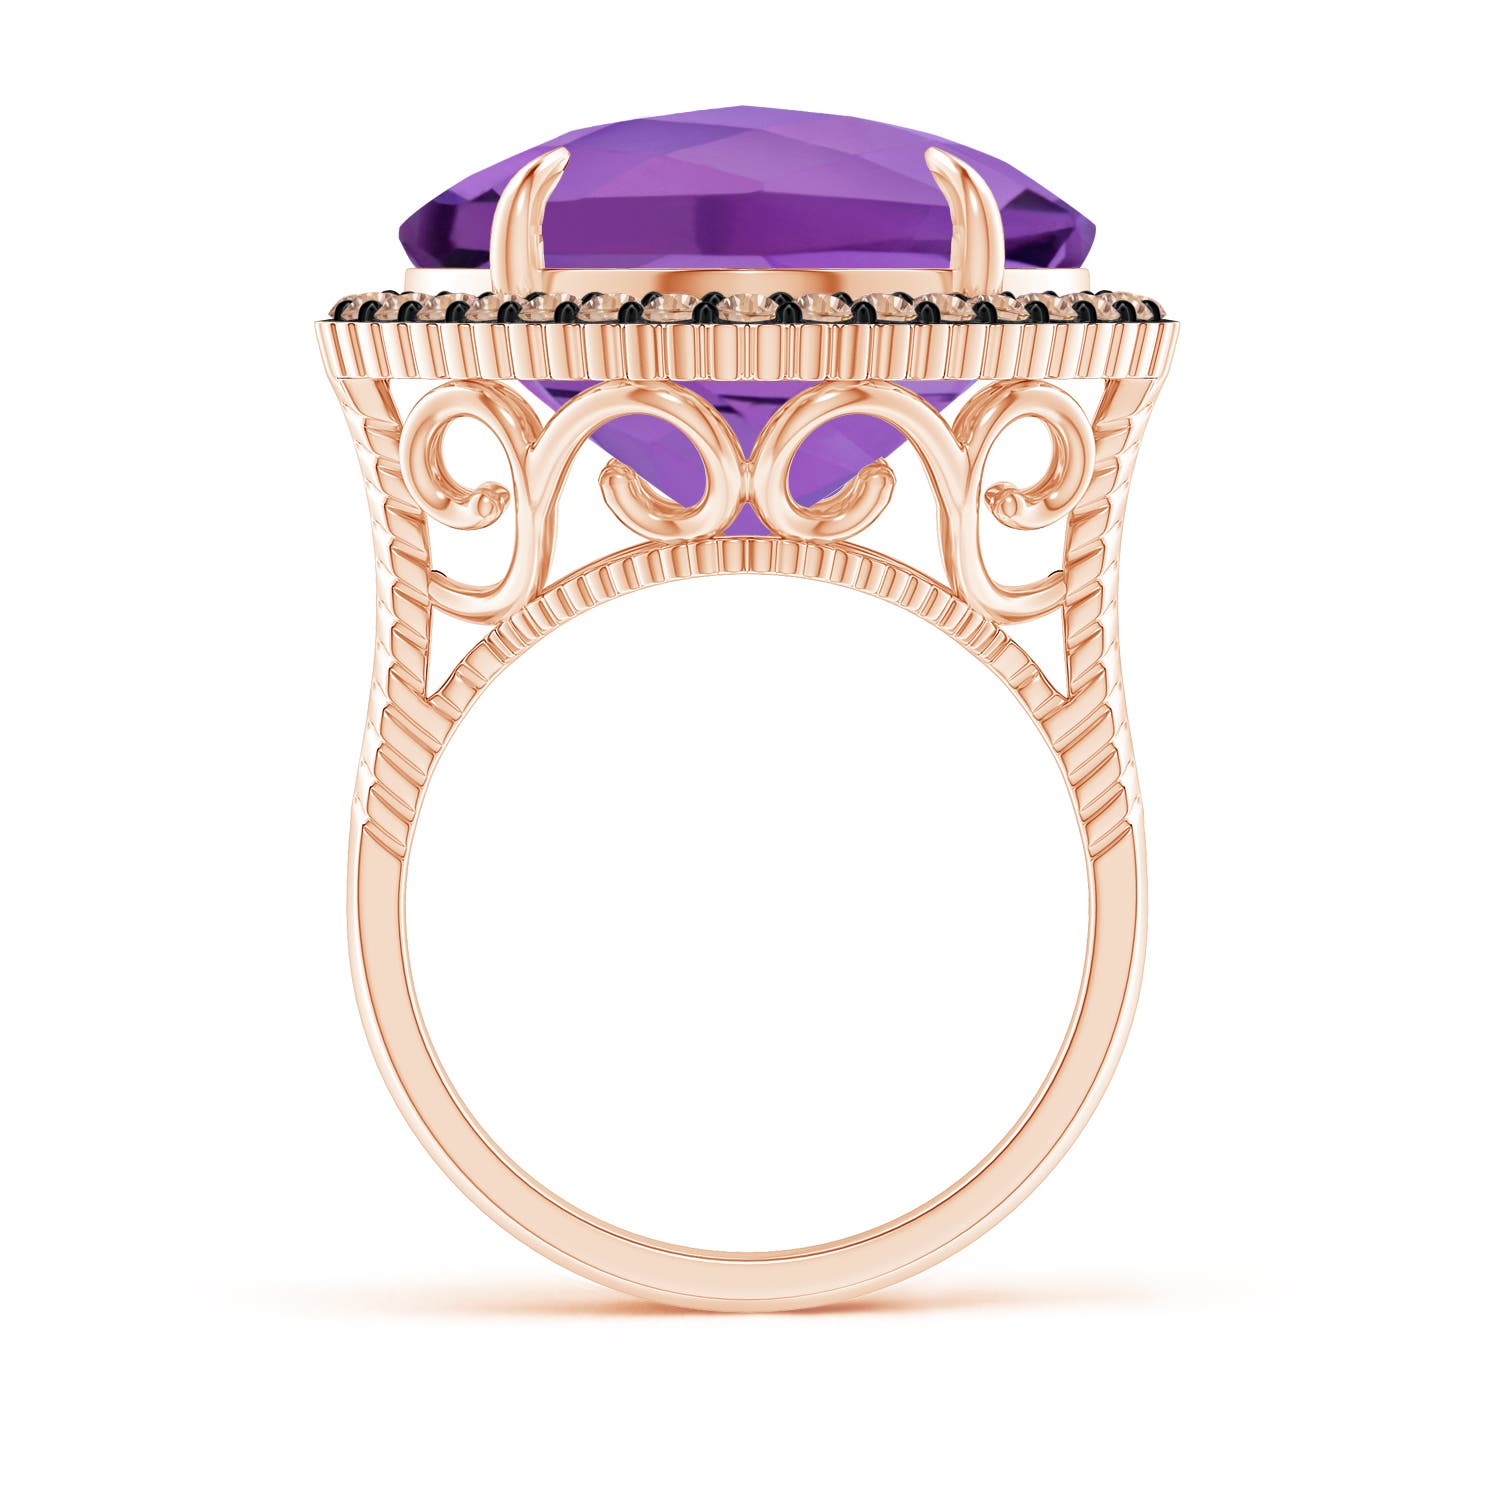 AA - Amethyst / 14.08 CT / 14 KT Rose Gold